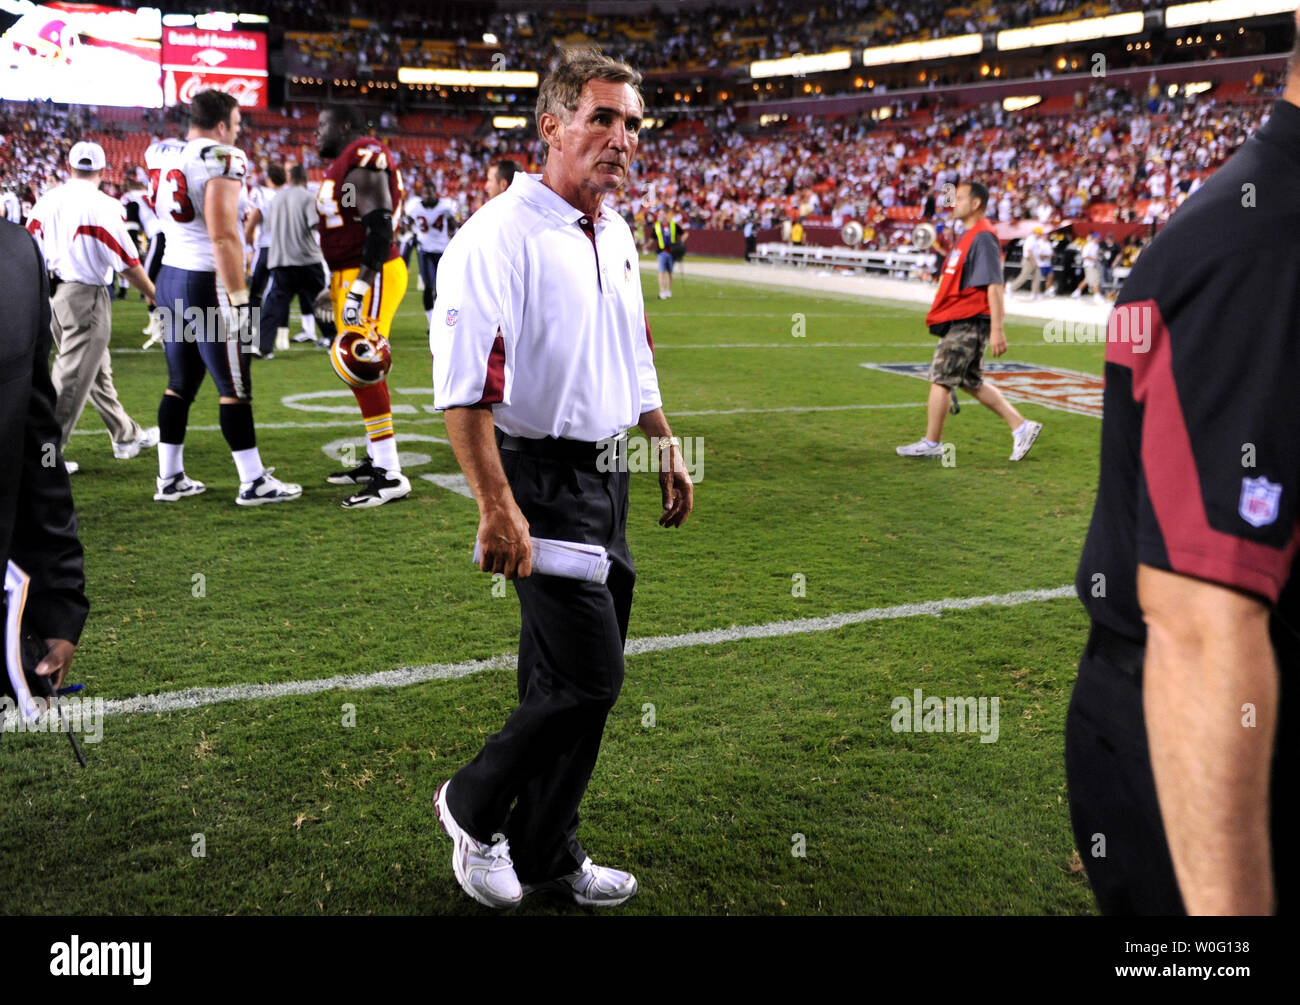 Washington Redskins head coach Mike Shanahan walks off the field after the Redskins were defeated by the Houston Texans 30-27 at FedEx Field in Washington on September 19, 2010.   UPI/Kevin Dietsch Stock Photo